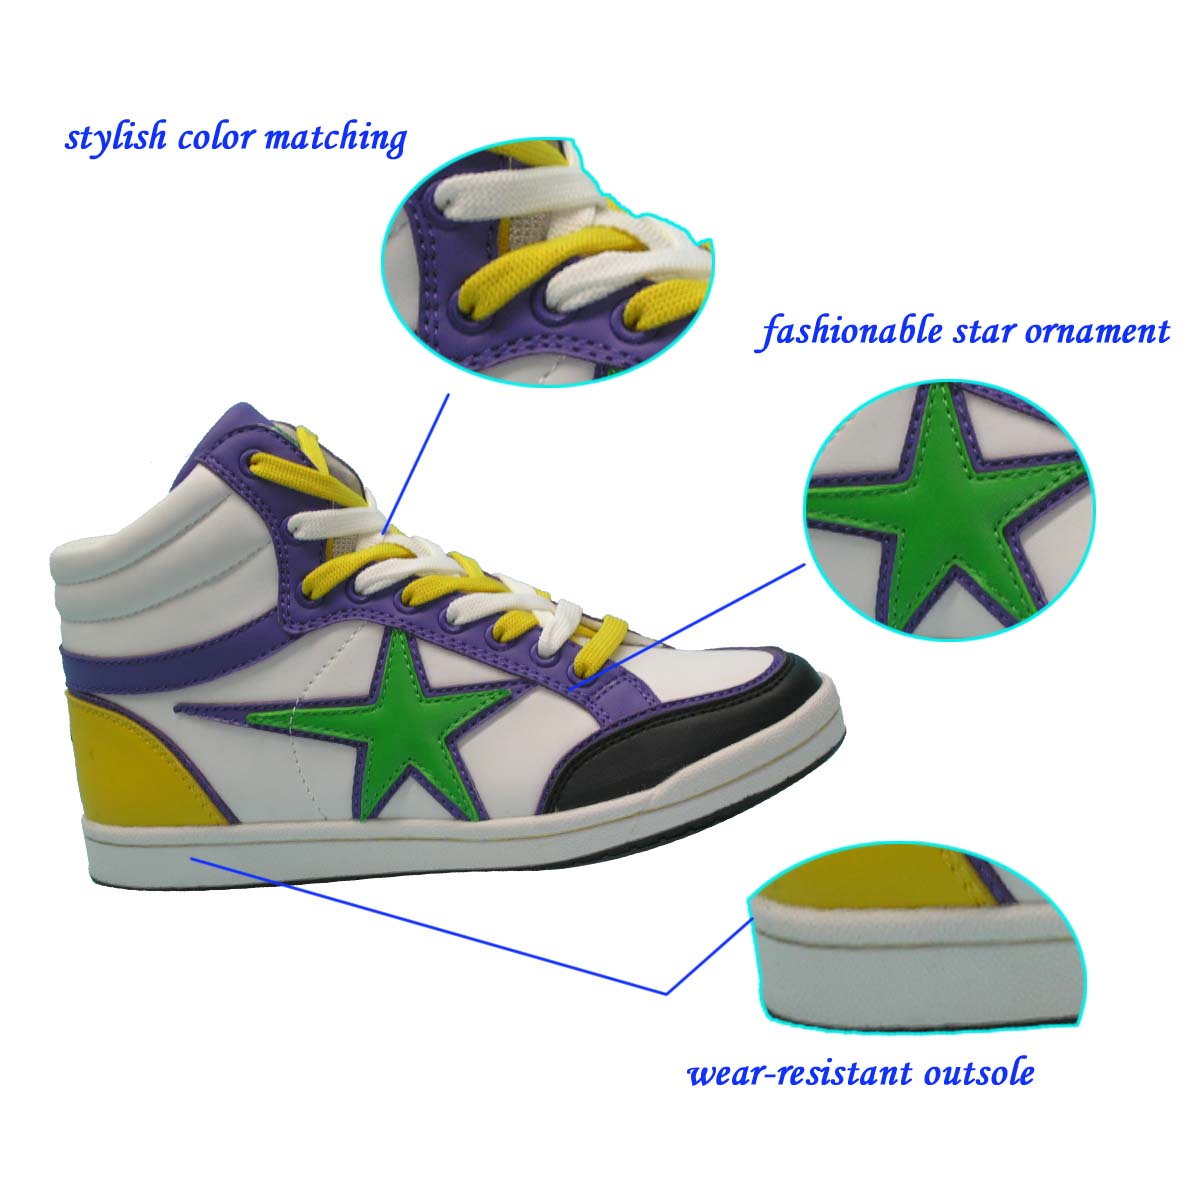 Best Selling Unisex High Cut Casual Sports Skate Shoe with Stylish Upper and Durable Outsole